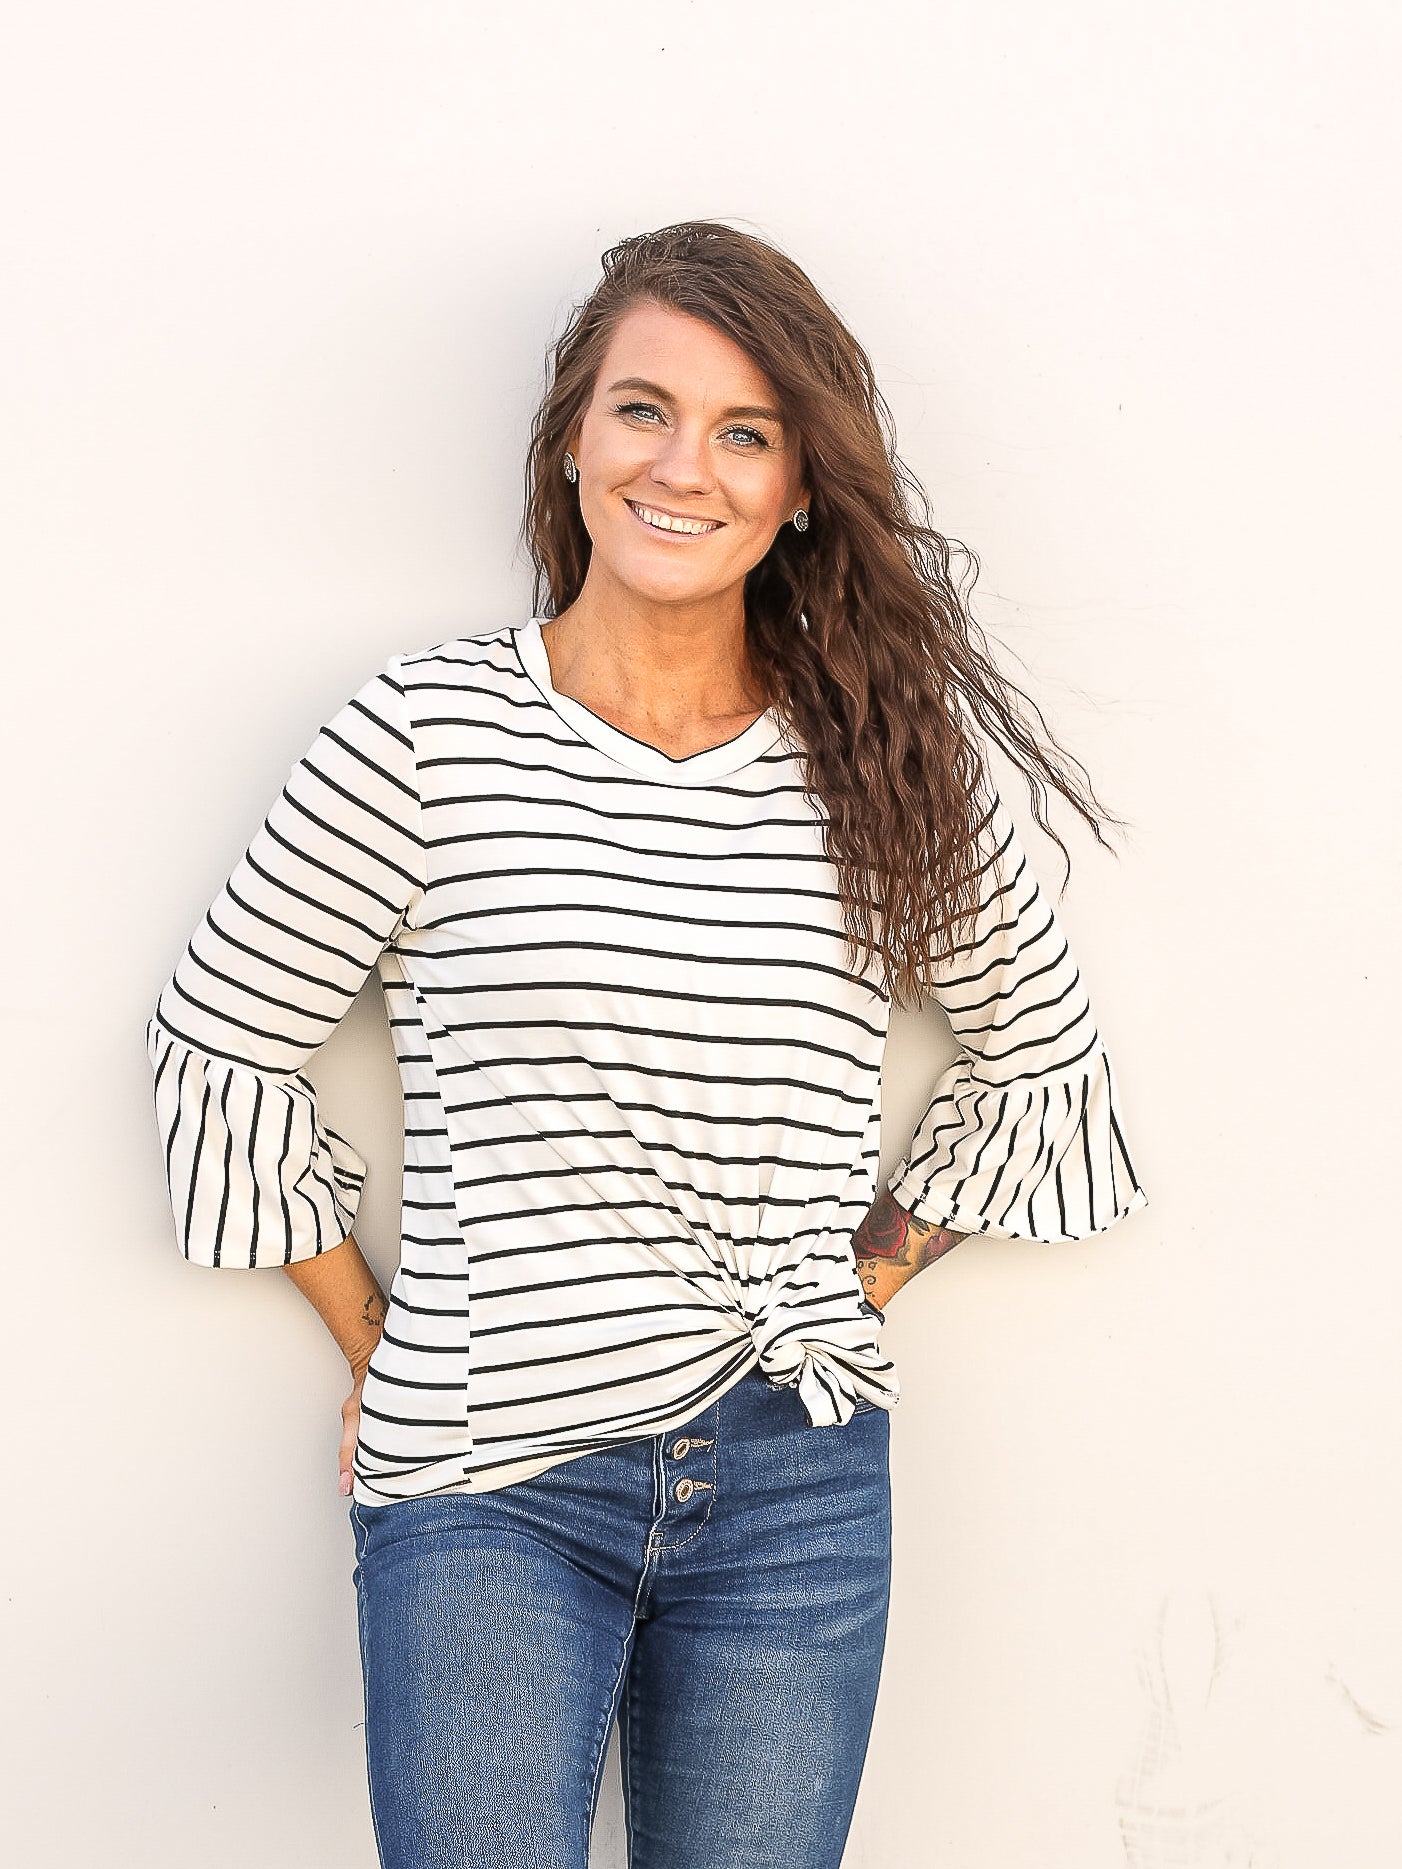 Classic back and white striped top with a front knot. Styled with denim pants and stud earrings.